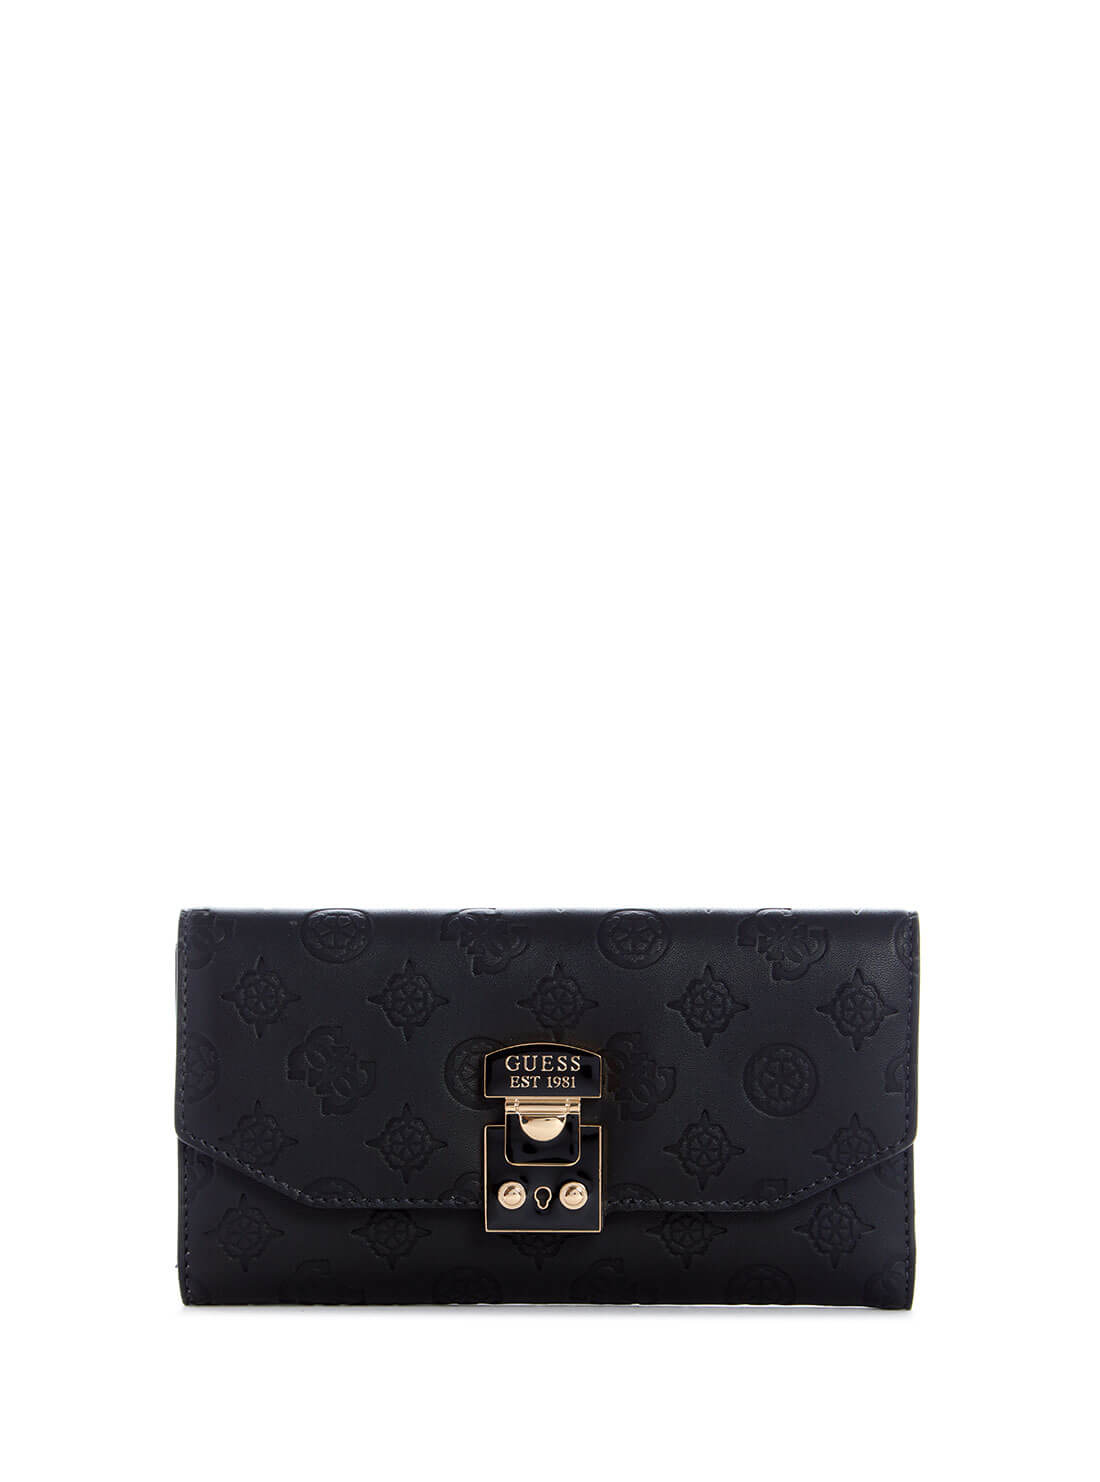 GUESS Womens  Black Carlson Multi Clutch PG839866 Front View